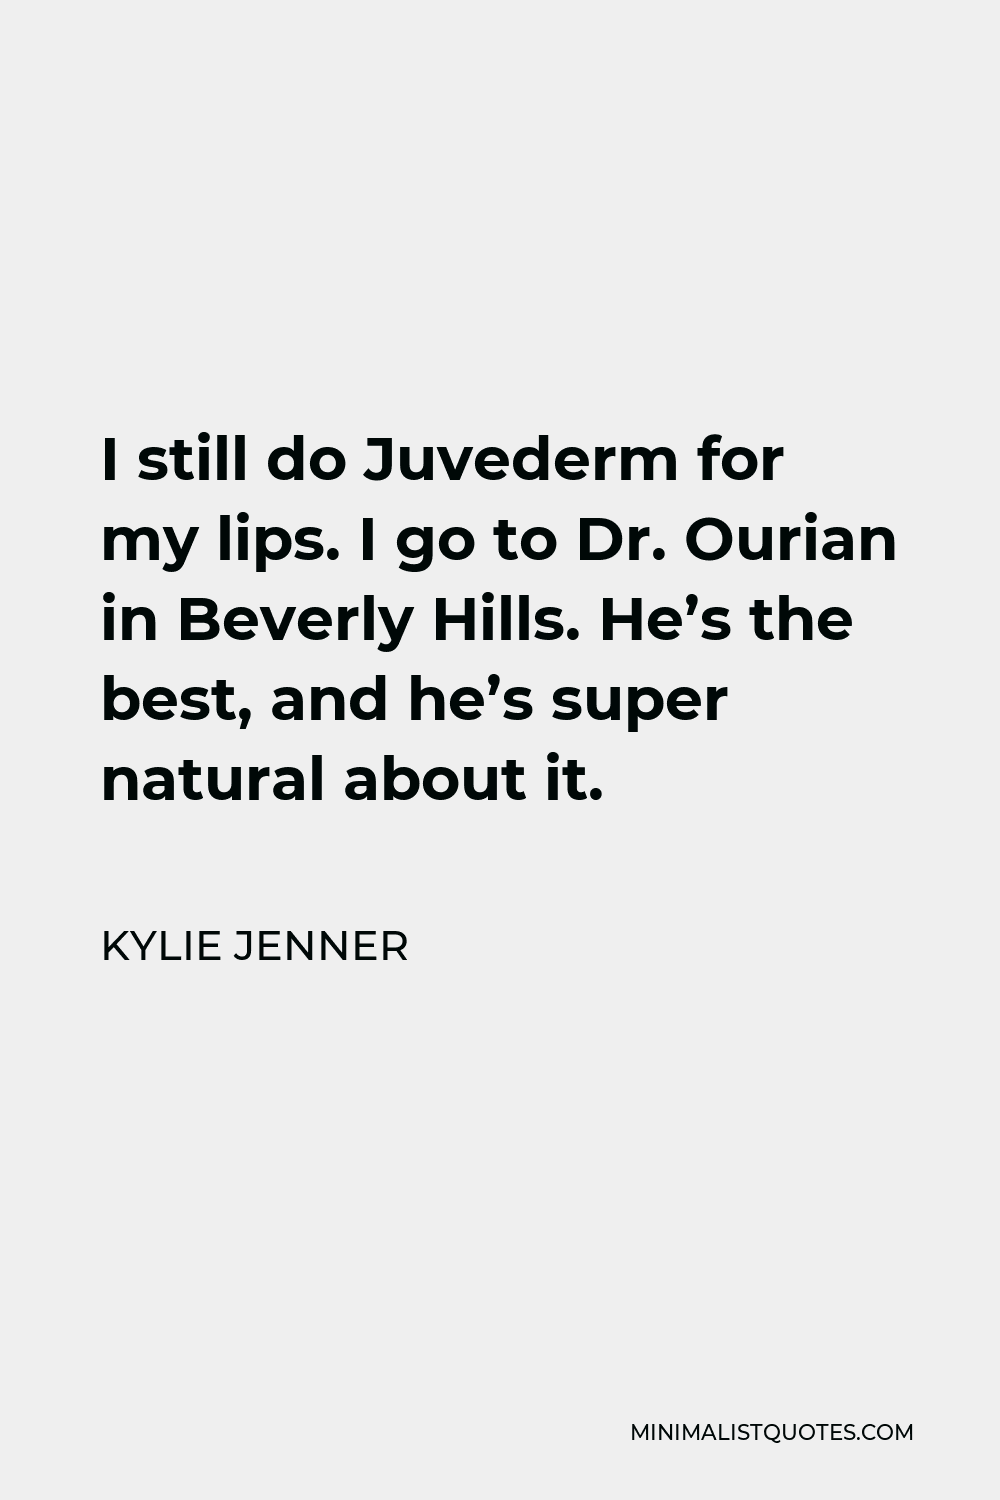 Kylie Jenner Quote - I still do Juvederm for my lips. I go to Dr. Ourian in Beverly Hills. He’s the best, and he’s super natural about it.